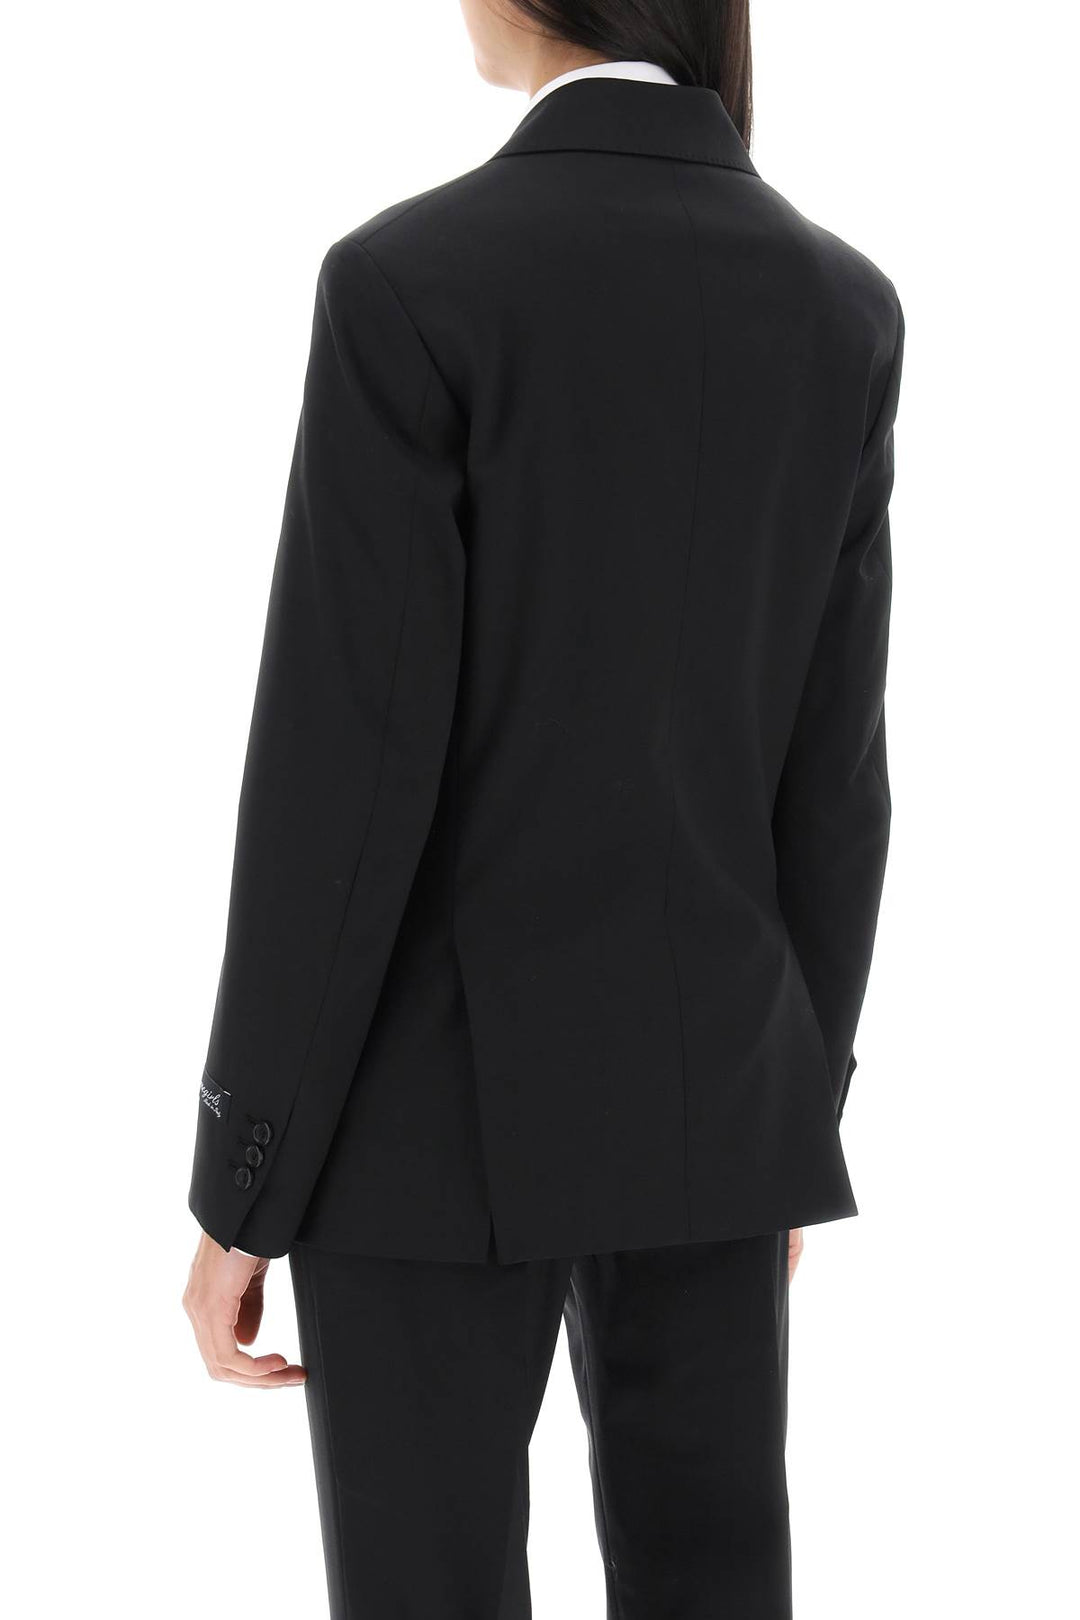 Homme Girls Slim Fit Double Breasted Blazer   Black